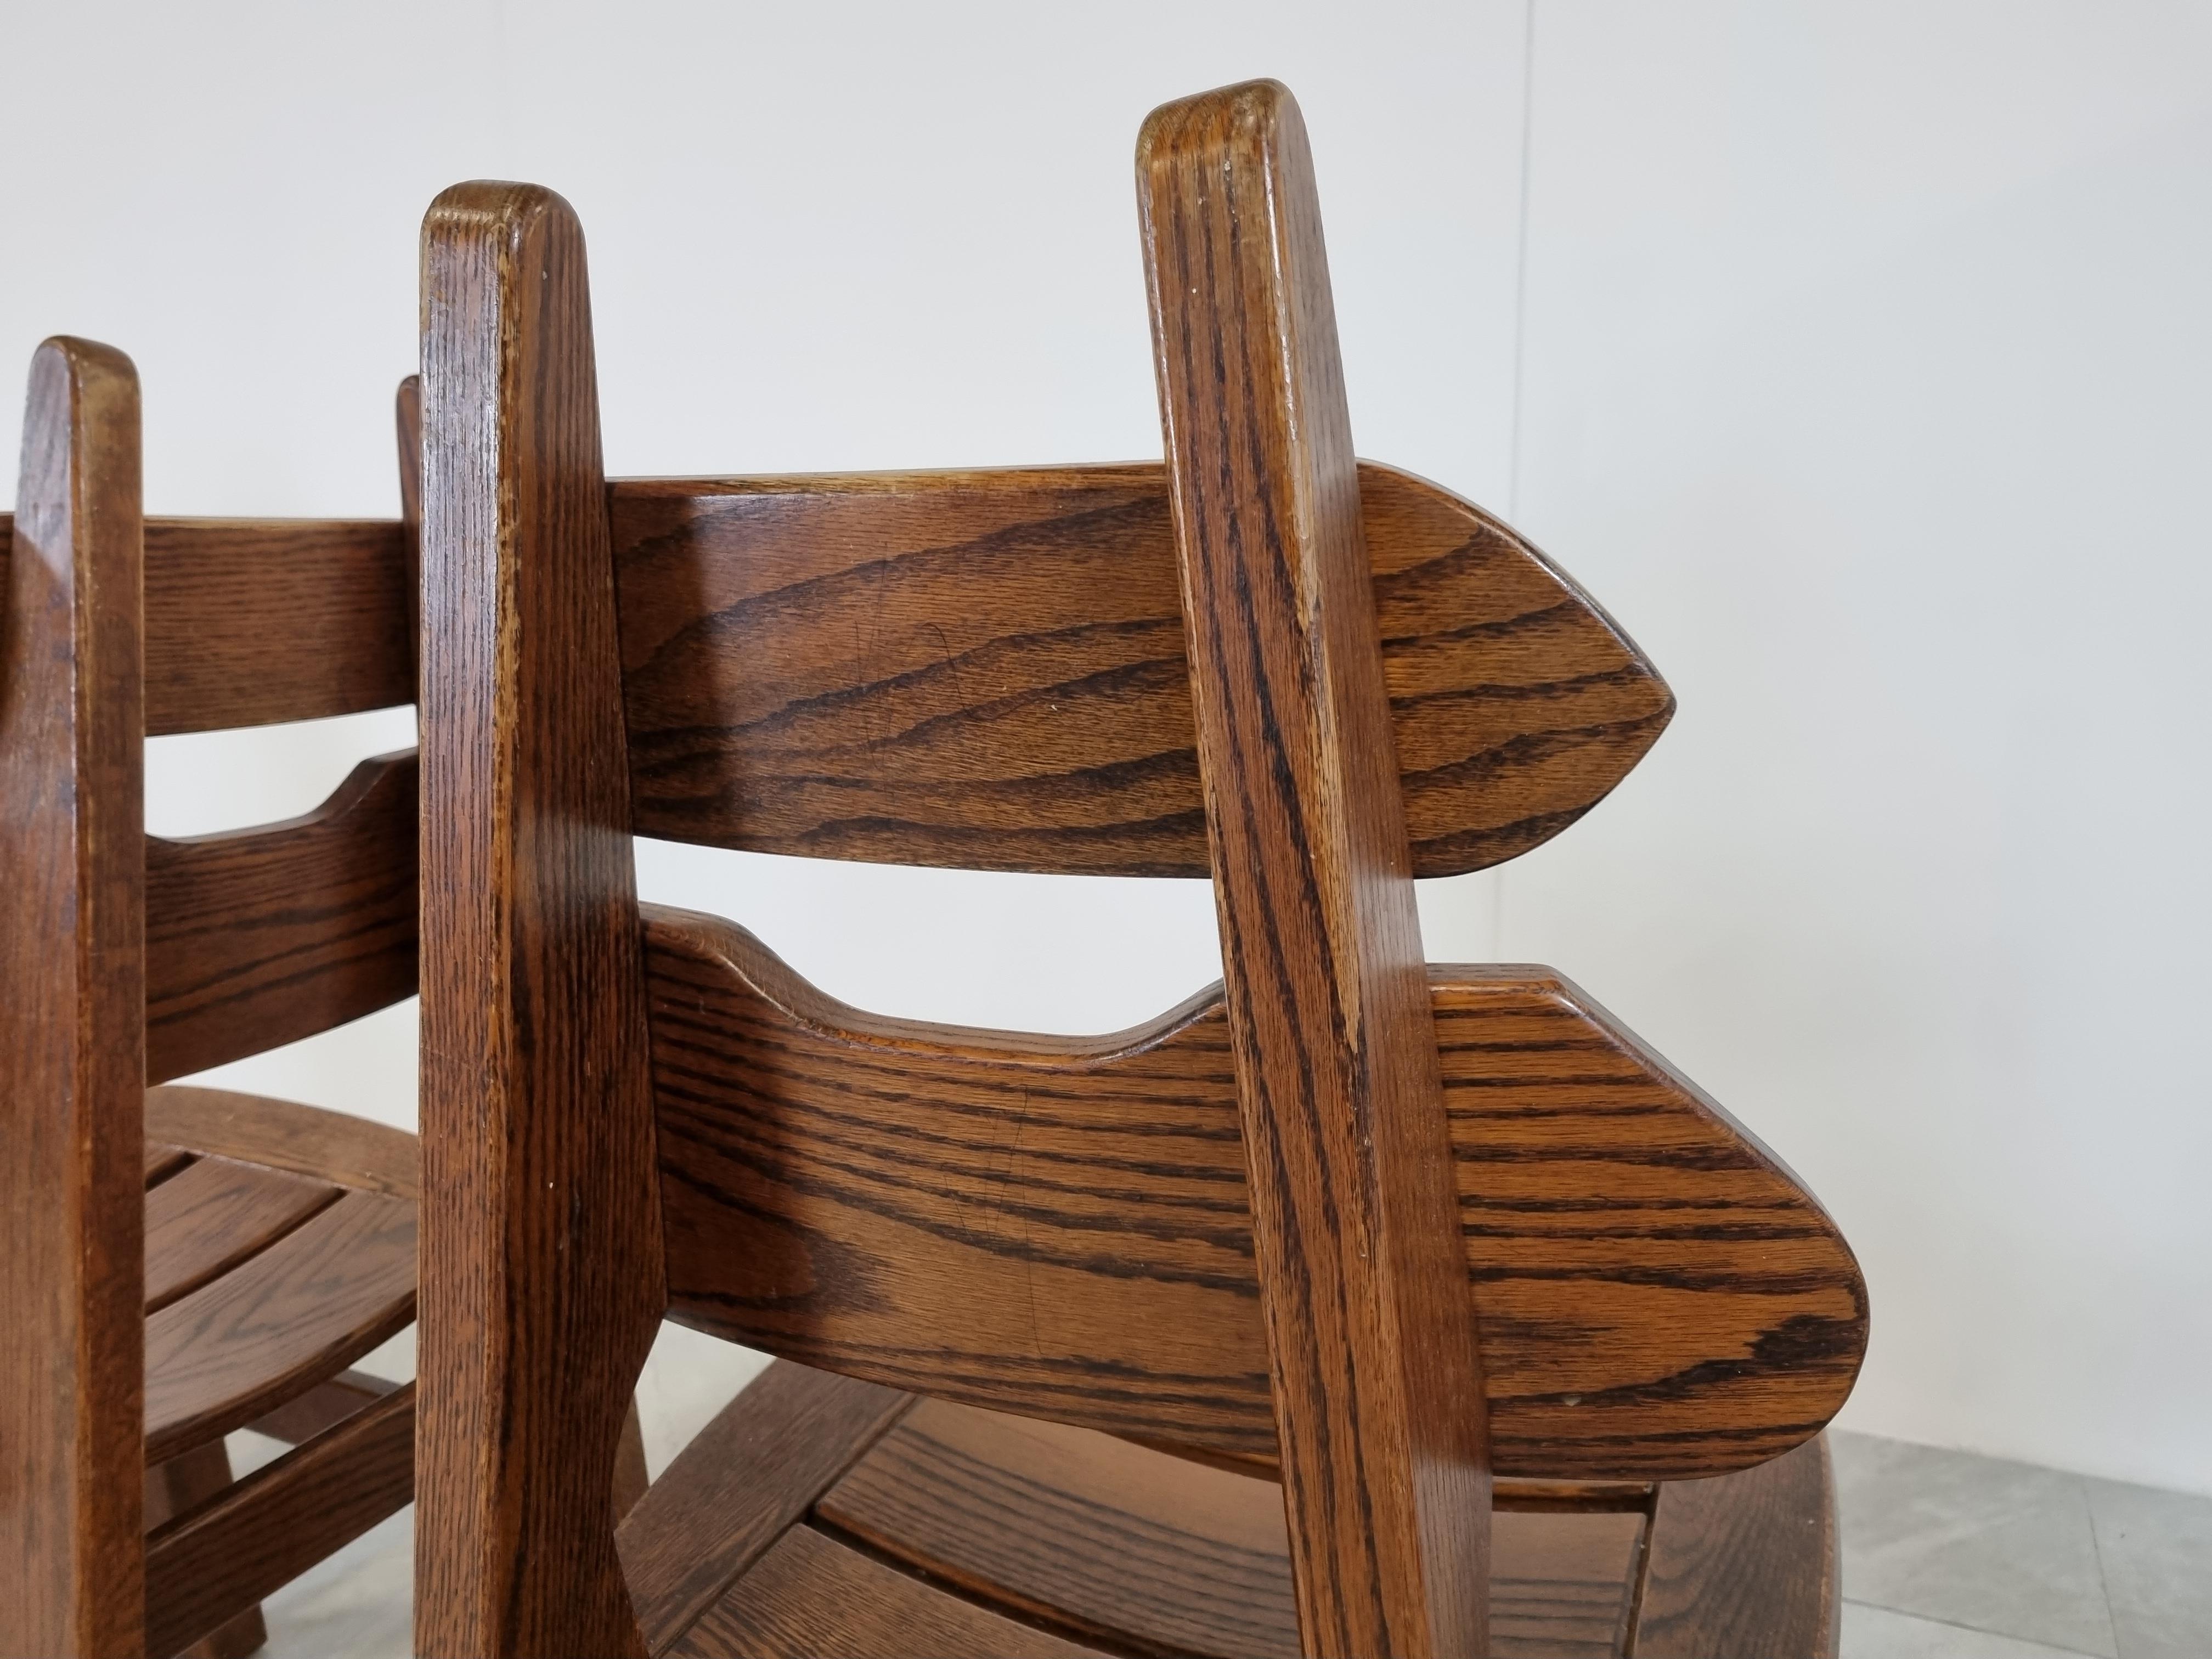 Mid-century solid elm wood brutalist dining chairs.

Beautiful, timeless and robust design.

Good original condition.

1960s - Germany

Dimensions:
Height: 100 cm / 39.37